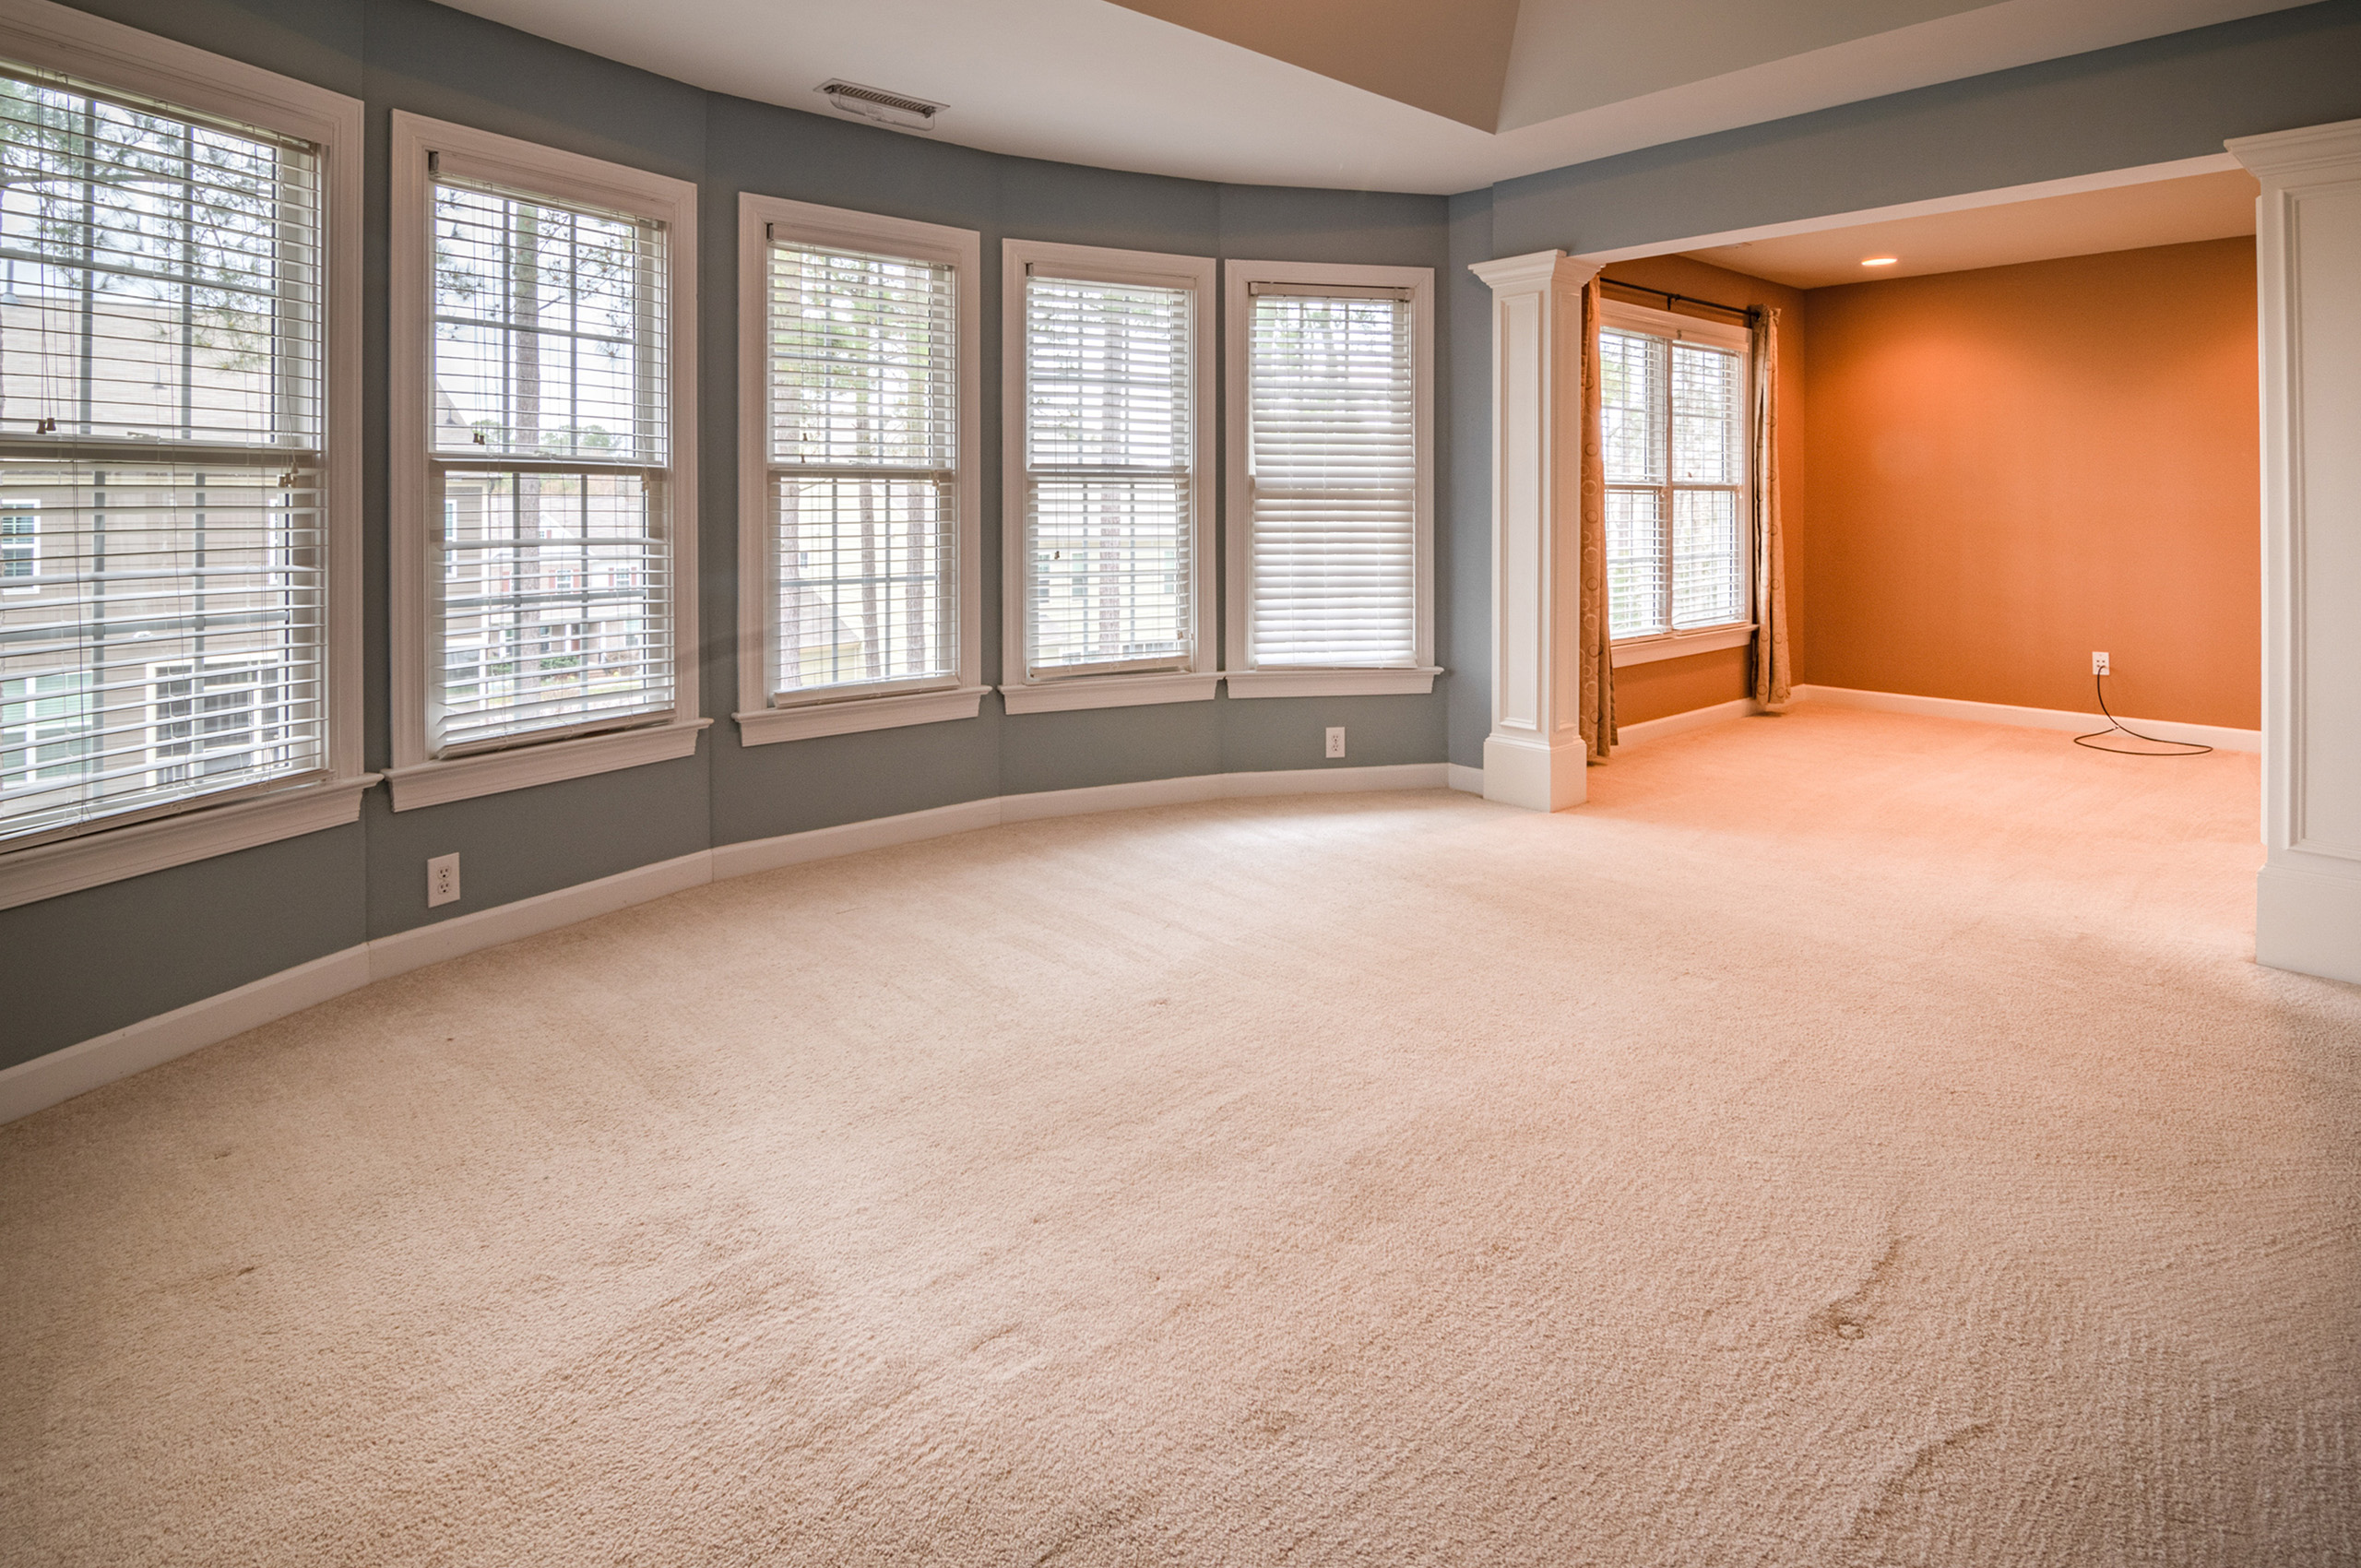 living-room-with-plenty-windows-and-carpeted-floor-3990587 2